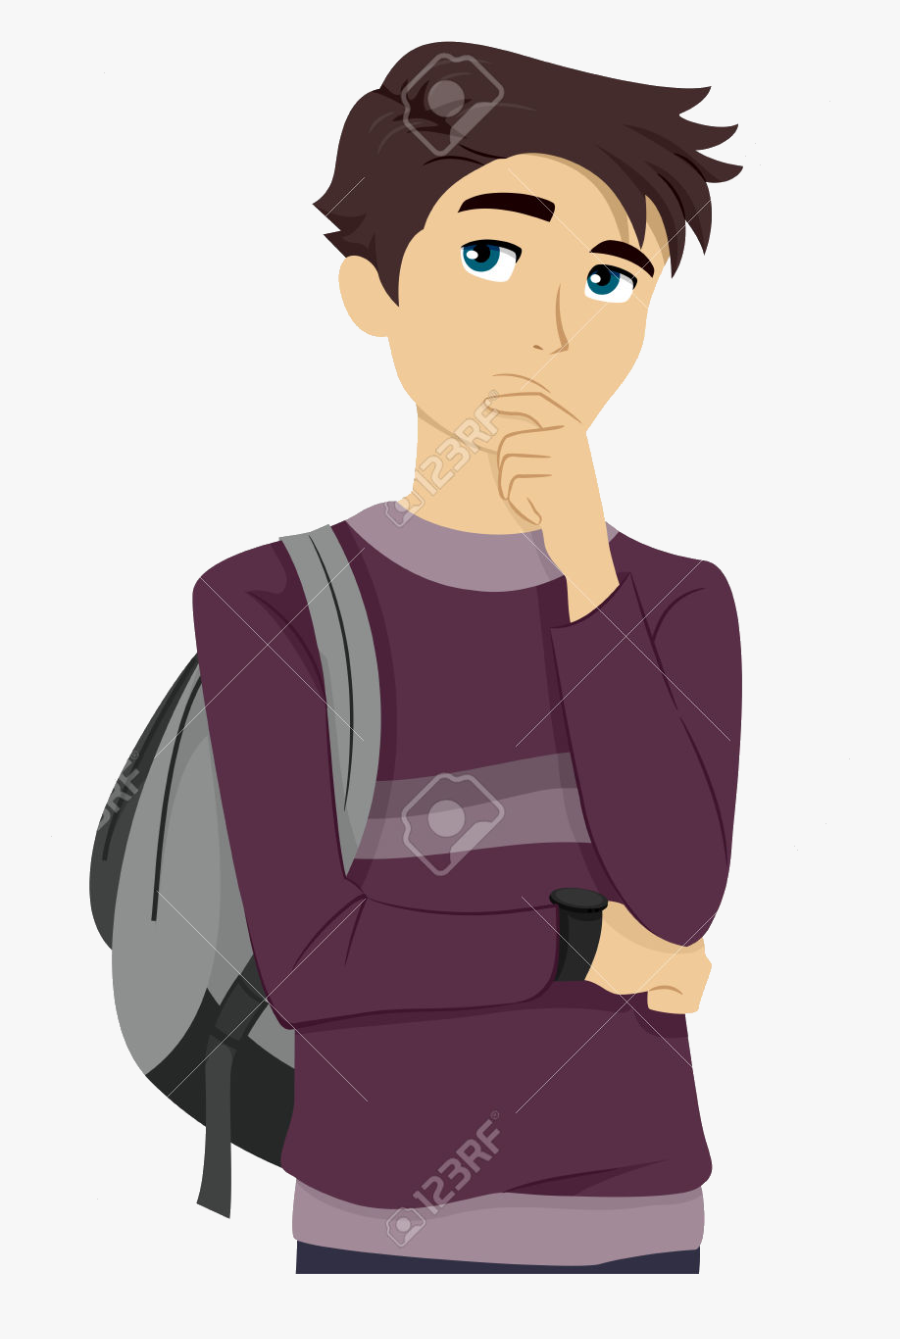 College Student Thinking Clipart Abeoncliparts Cliparts - College Student College Clipart, Transparent Clipart